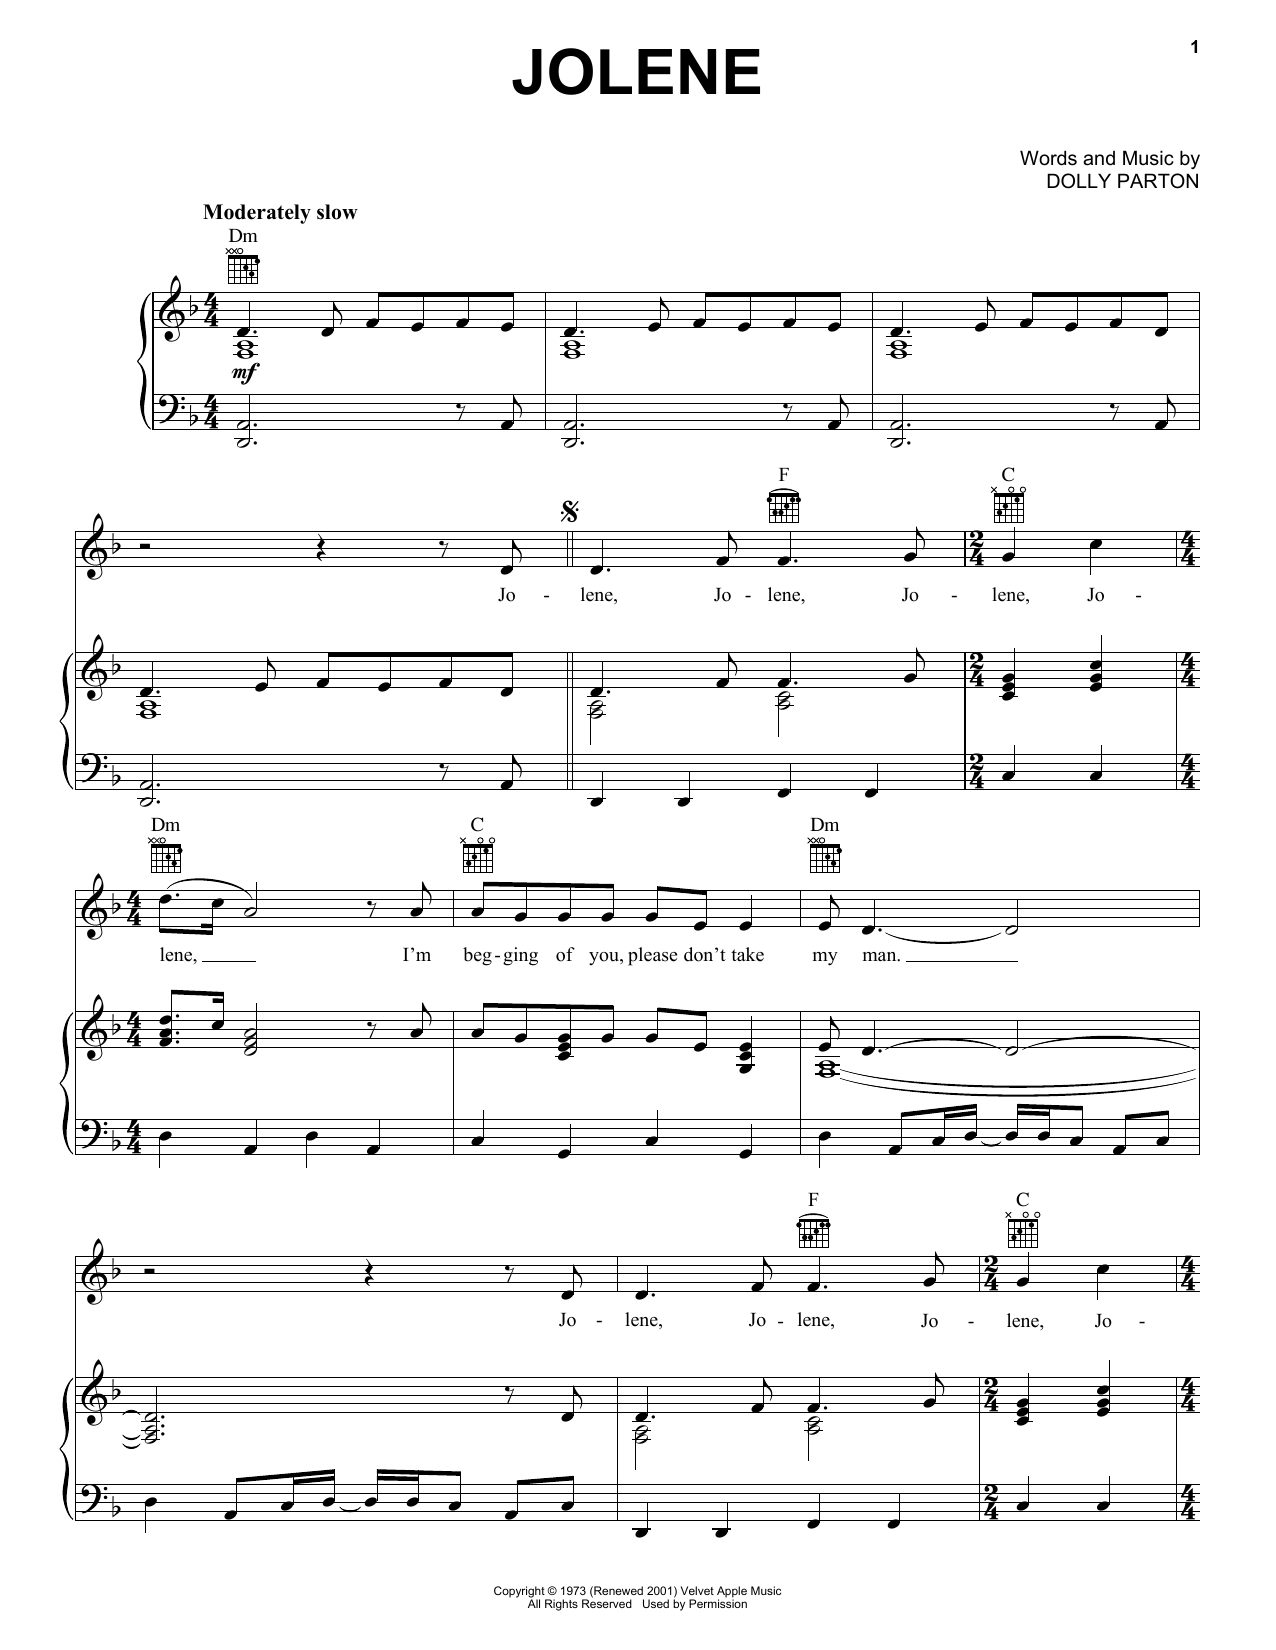 Dolly Parton Jolene Sheet Music Notes Chords Alto Saxophone Download Country 44317 Pdf c a d gb g db e dm cm bb gm eb em am ➧ chords for jolene banjo with capo transposer, play along with guitar, piano, ukulele & mandolin. dolly parton jolene sheet music notes chords